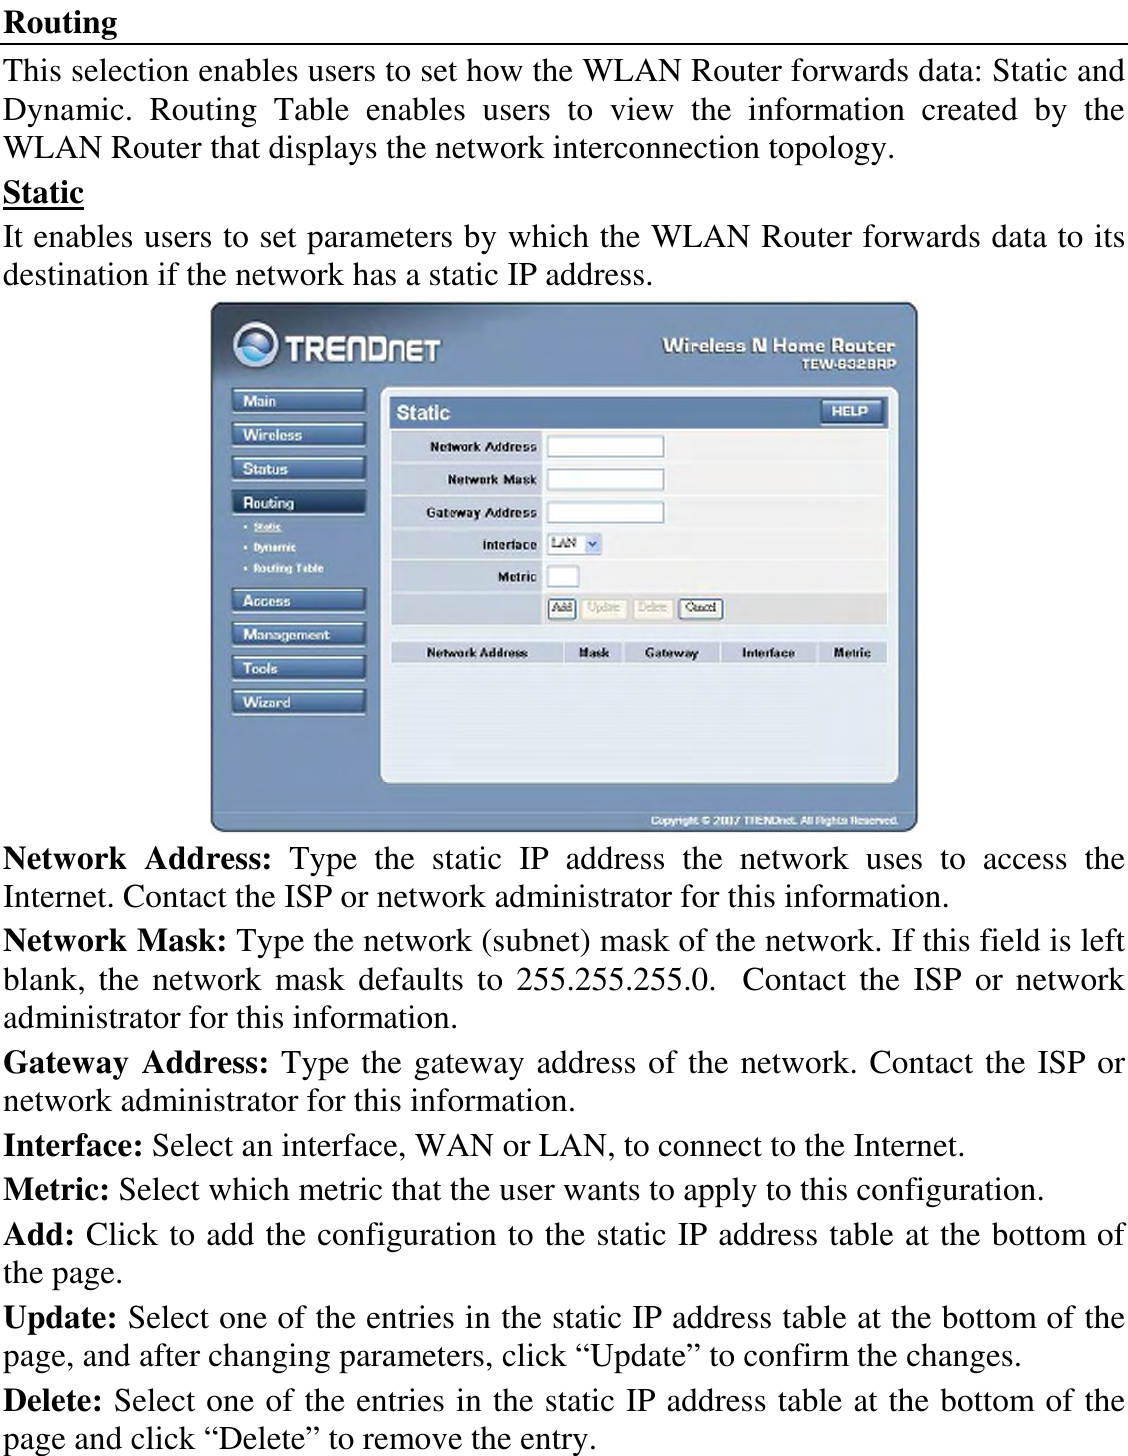 Routing This selection enables users to set how the WLAN Router forwards data: Static and Dynamic.  Routing  Table  enables  users  to  view  the  information  created  by  the WLAN Router that displays the network interconnection topology. Static It enables users to set parameters by which the WLAN Router forwards data to its destination if the network has a static IP address.  Network  Address:  Type  the  static  IP  address  the  network  uses  to  access  the Internet. Contact the ISP or network administrator for this information. Network Mask: Type the network (subnet) mask of the network. If this field is left blank,  the network  mask defaults to 255.255.255.0.    Contact  the  ISP  or network administrator for this information. Gateway Address: Type the gateway address of the network. Contact the ISP or network administrator for this information. Interface: Select an interface, WAN or LAN, to connect to the Internet. Metric: Select which metric that the user wants to apply to this configuration. Add: Click to add the configuration to the static IP address table at the bottom of the page. Update: Select one of the entries in the static IP address table at the bottom of the page, and after changing parameters, click “Update” to confirm the changes. Delete: Select one of the entries in the static IP address table at the bottom of the page and click “Delete” to remove the entry. 